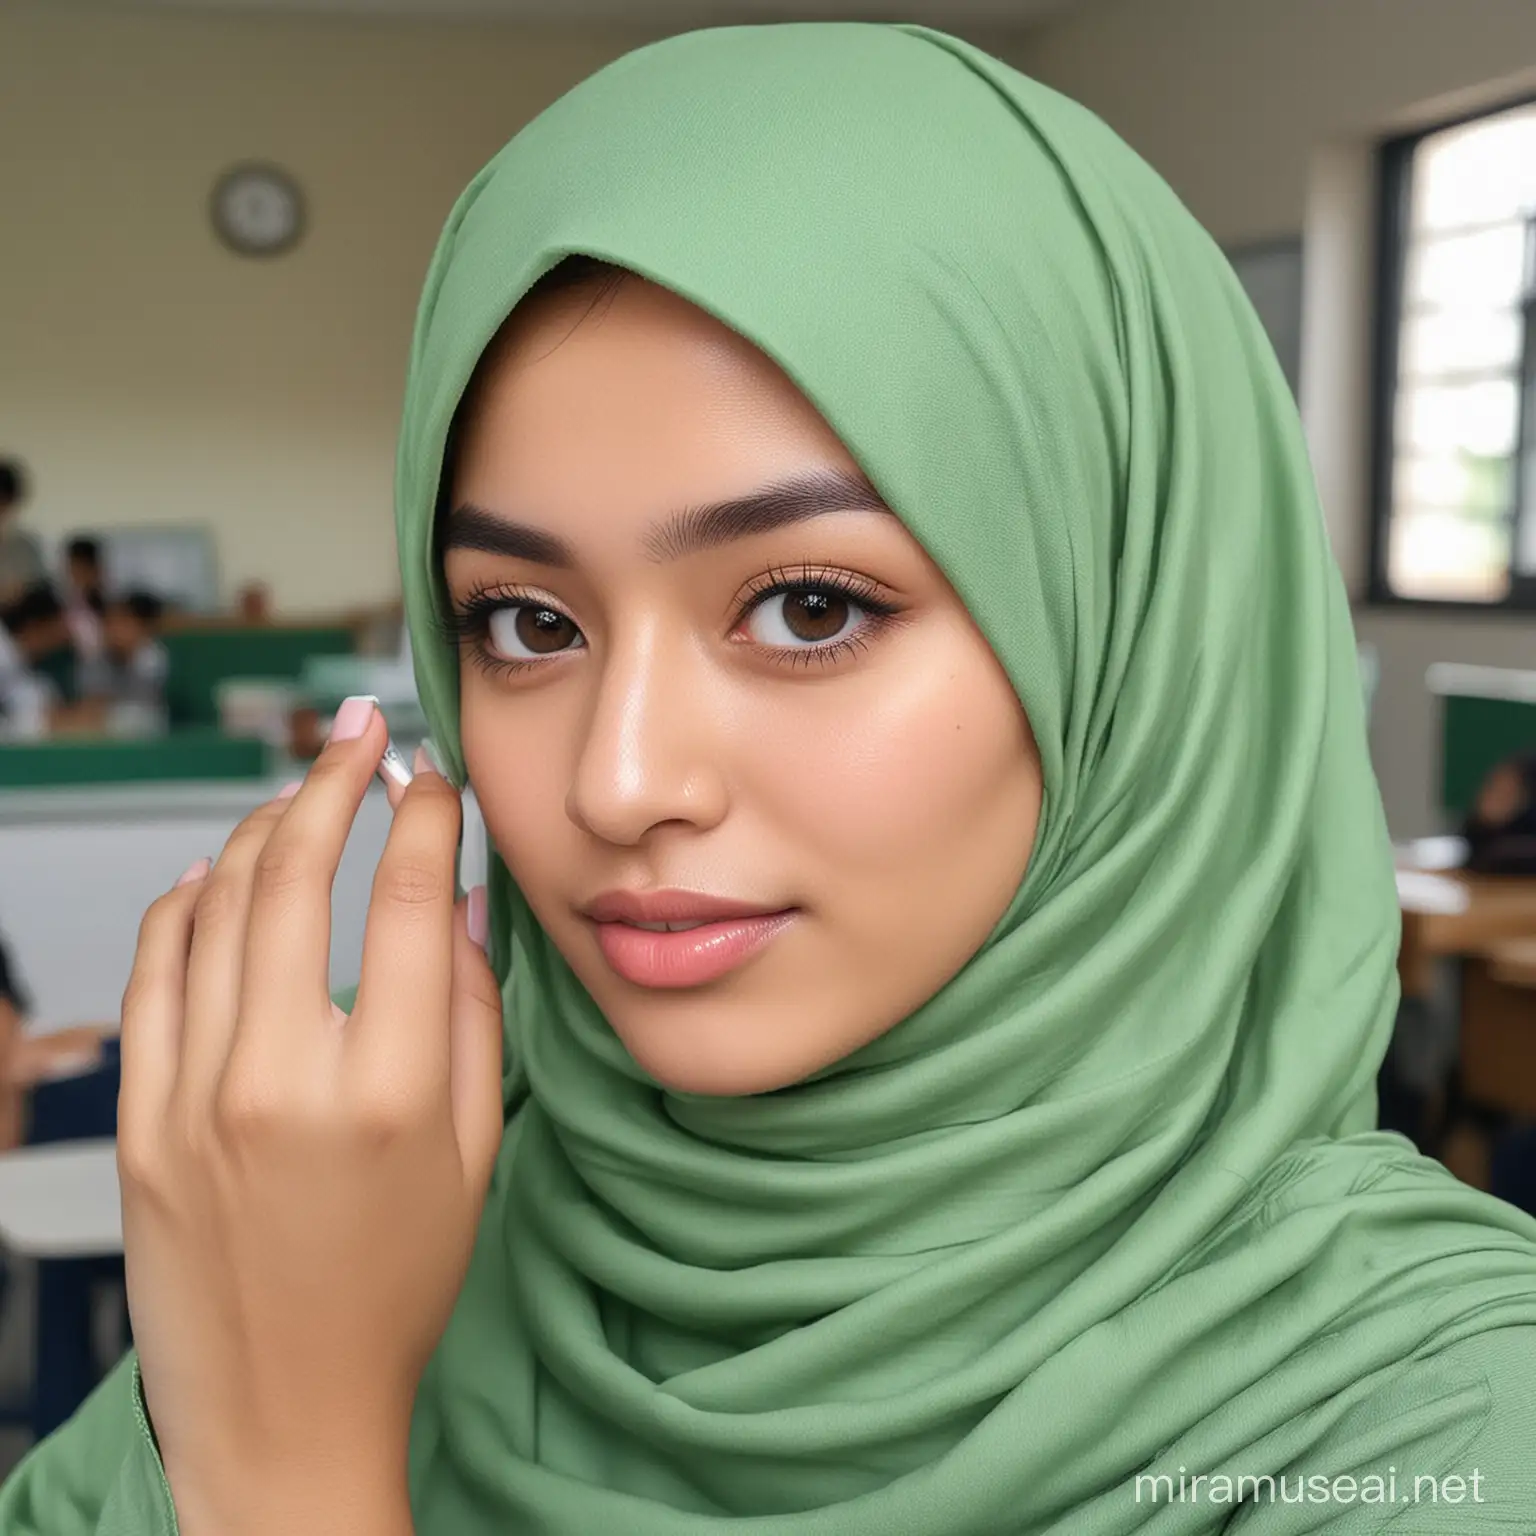 Indonesian Girl Wearing Hijab with Green Softlens at School